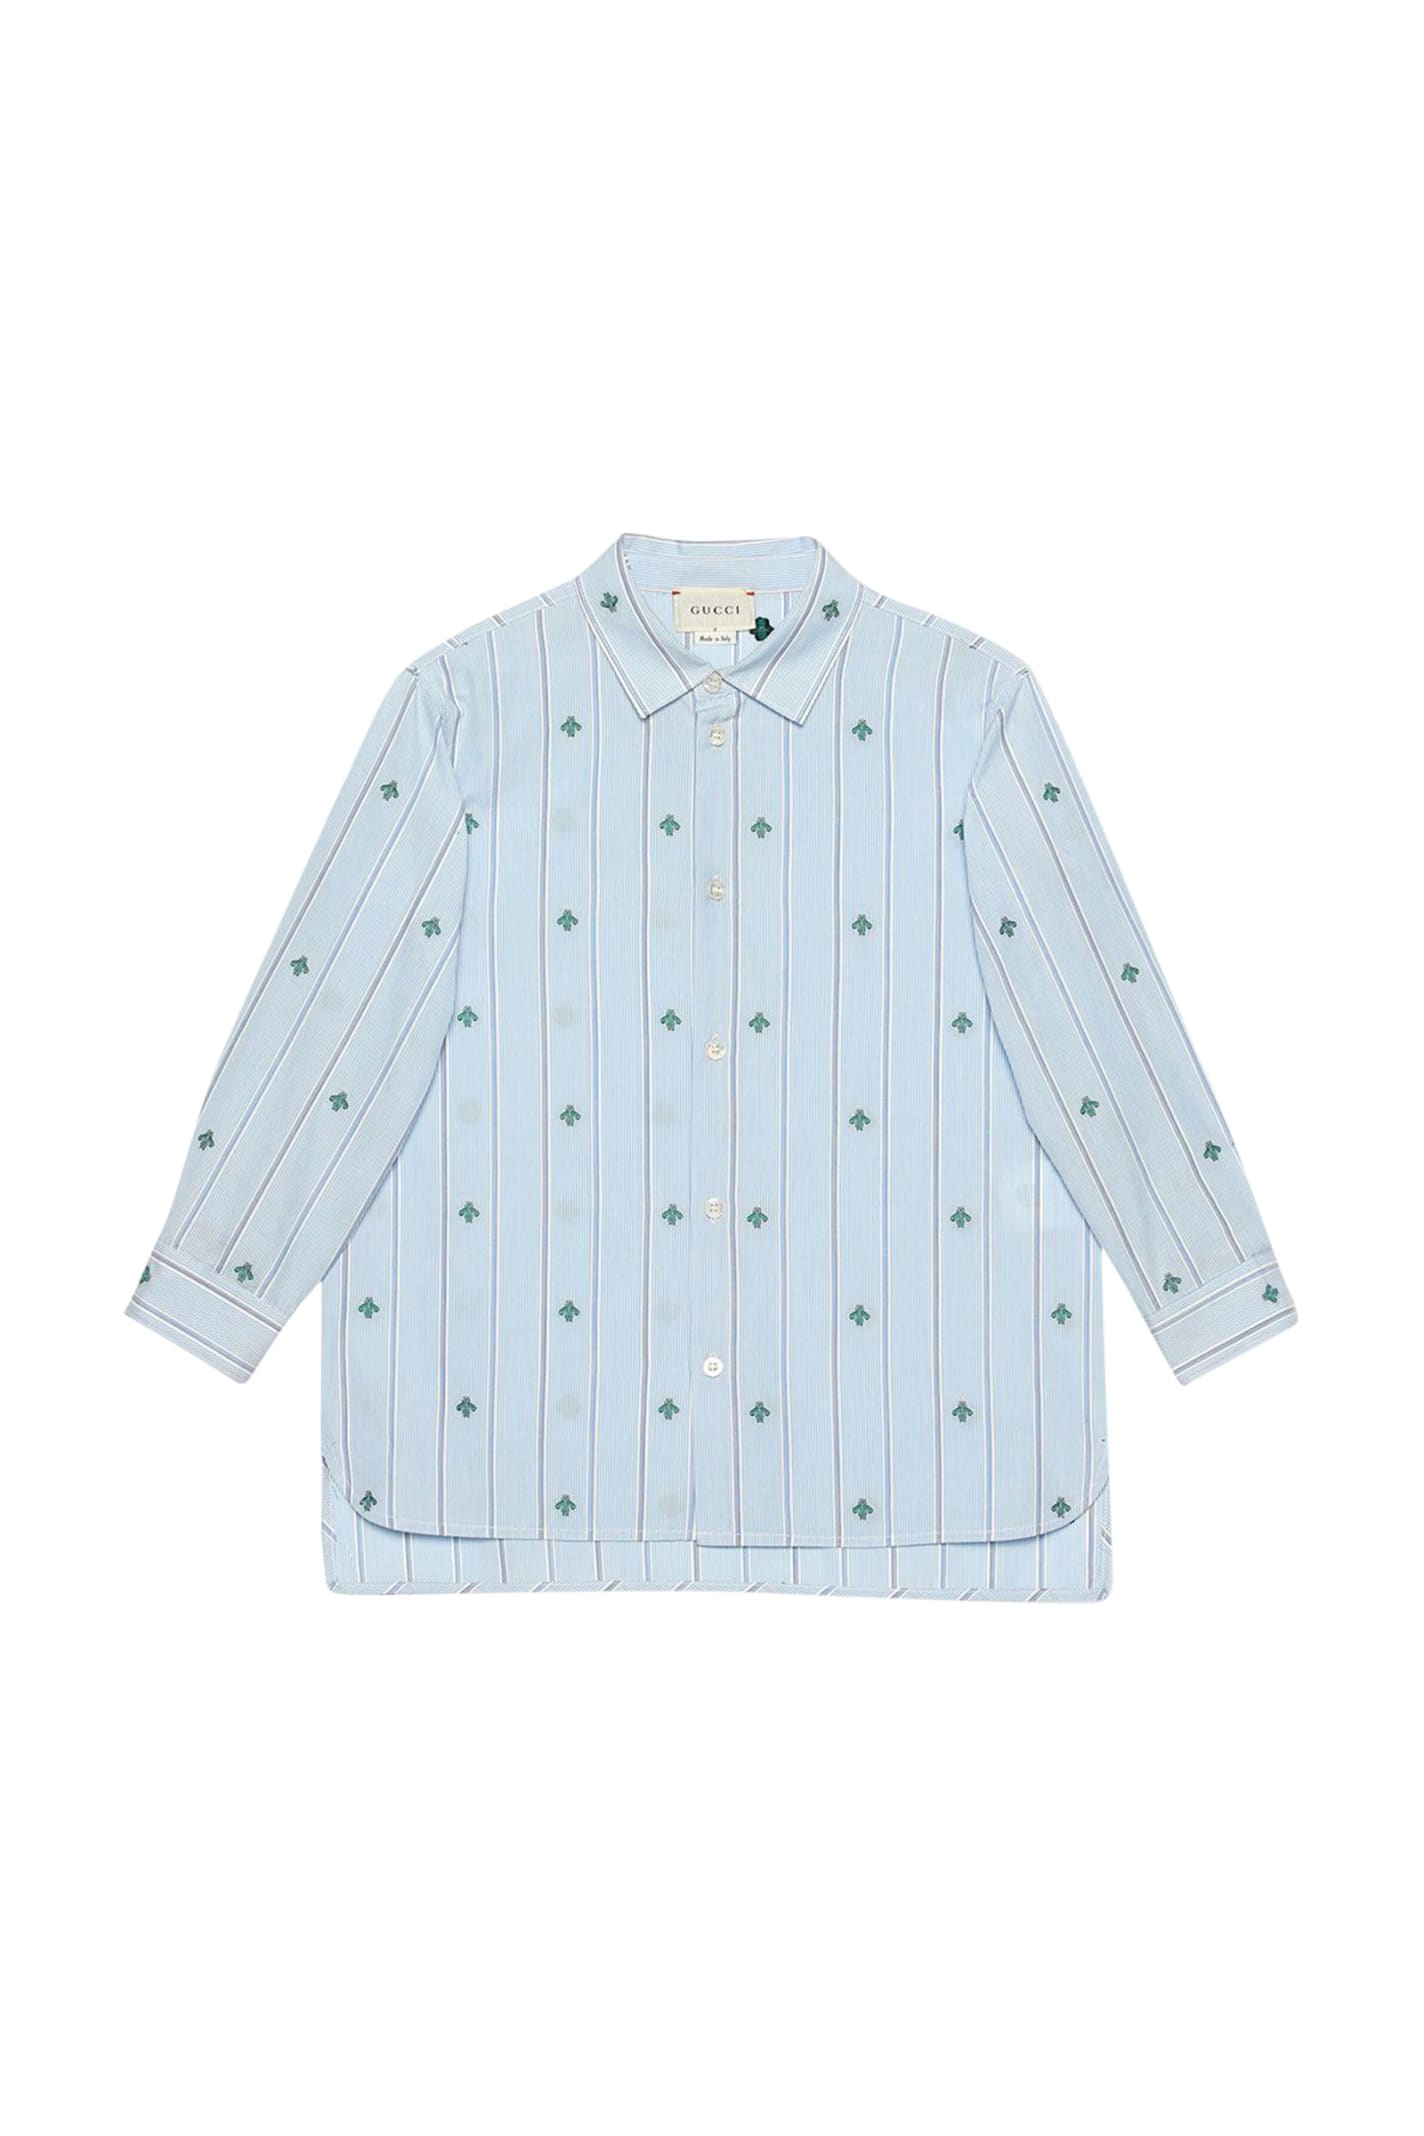 GUCCI KIDS SHIRT WITH BEES,11241636